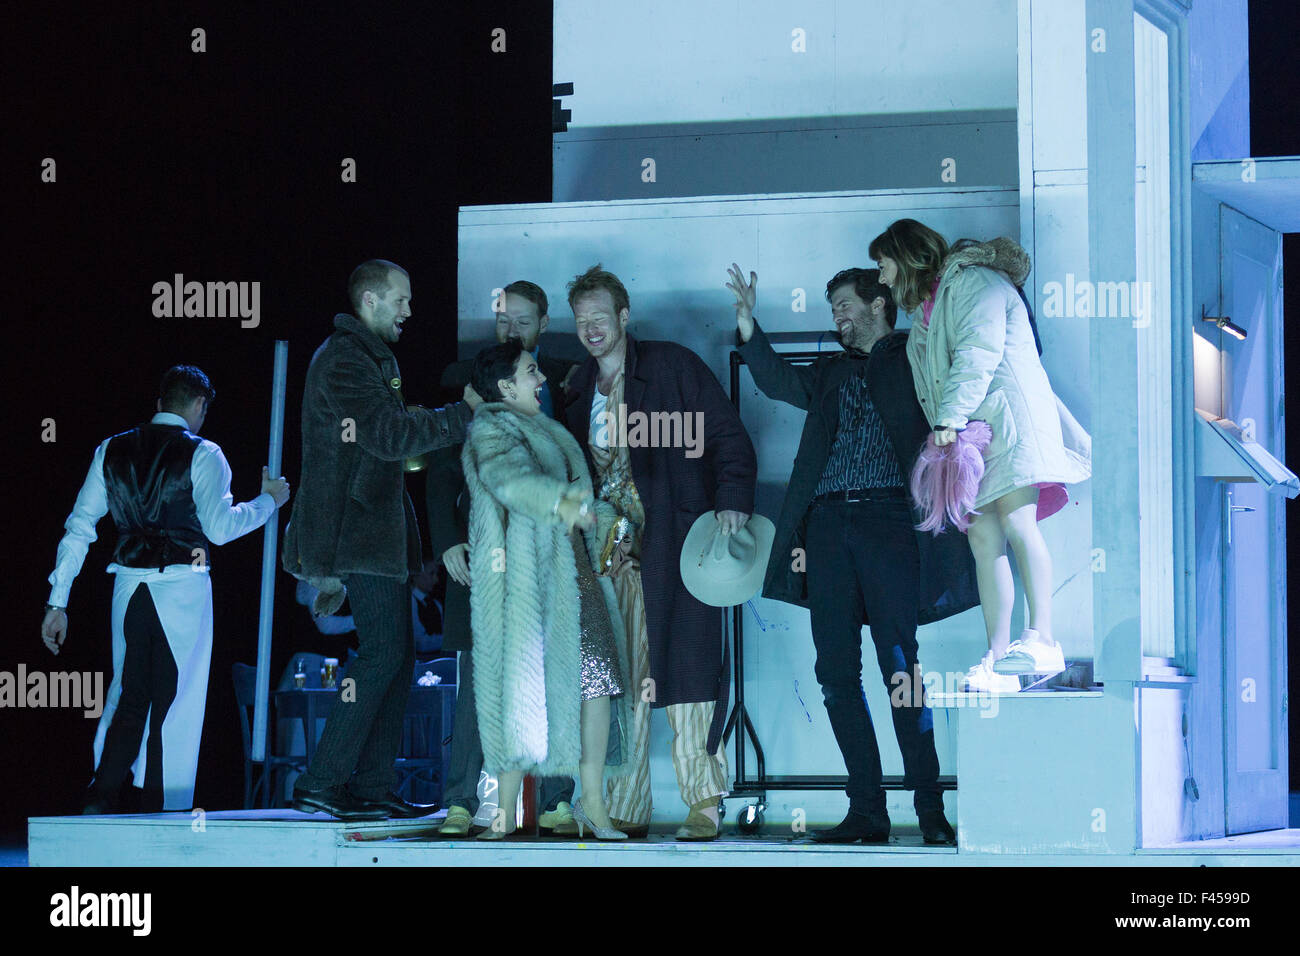 London, UK. 14/10/2015. L-R: Nicholas Masters as Colline, Ashley Riches as Schaunard, Rhian Lois as Musetta, Duncan Rock as Marcello, Zach Borichevsky as Rodolfo and Corinne Winters as Mimi. Dress rehearsal of the Giacomo Puccini opera La Boheme directed by Benedict Andrews at the London Coliseum. Conducted by Xian Zhang. Cast: Corinne Winters as Mimi, Zach Borichevsky as Rodolfo, Duncan Rock as Marcello and Rhian Lois as Musetta. Stock Photo